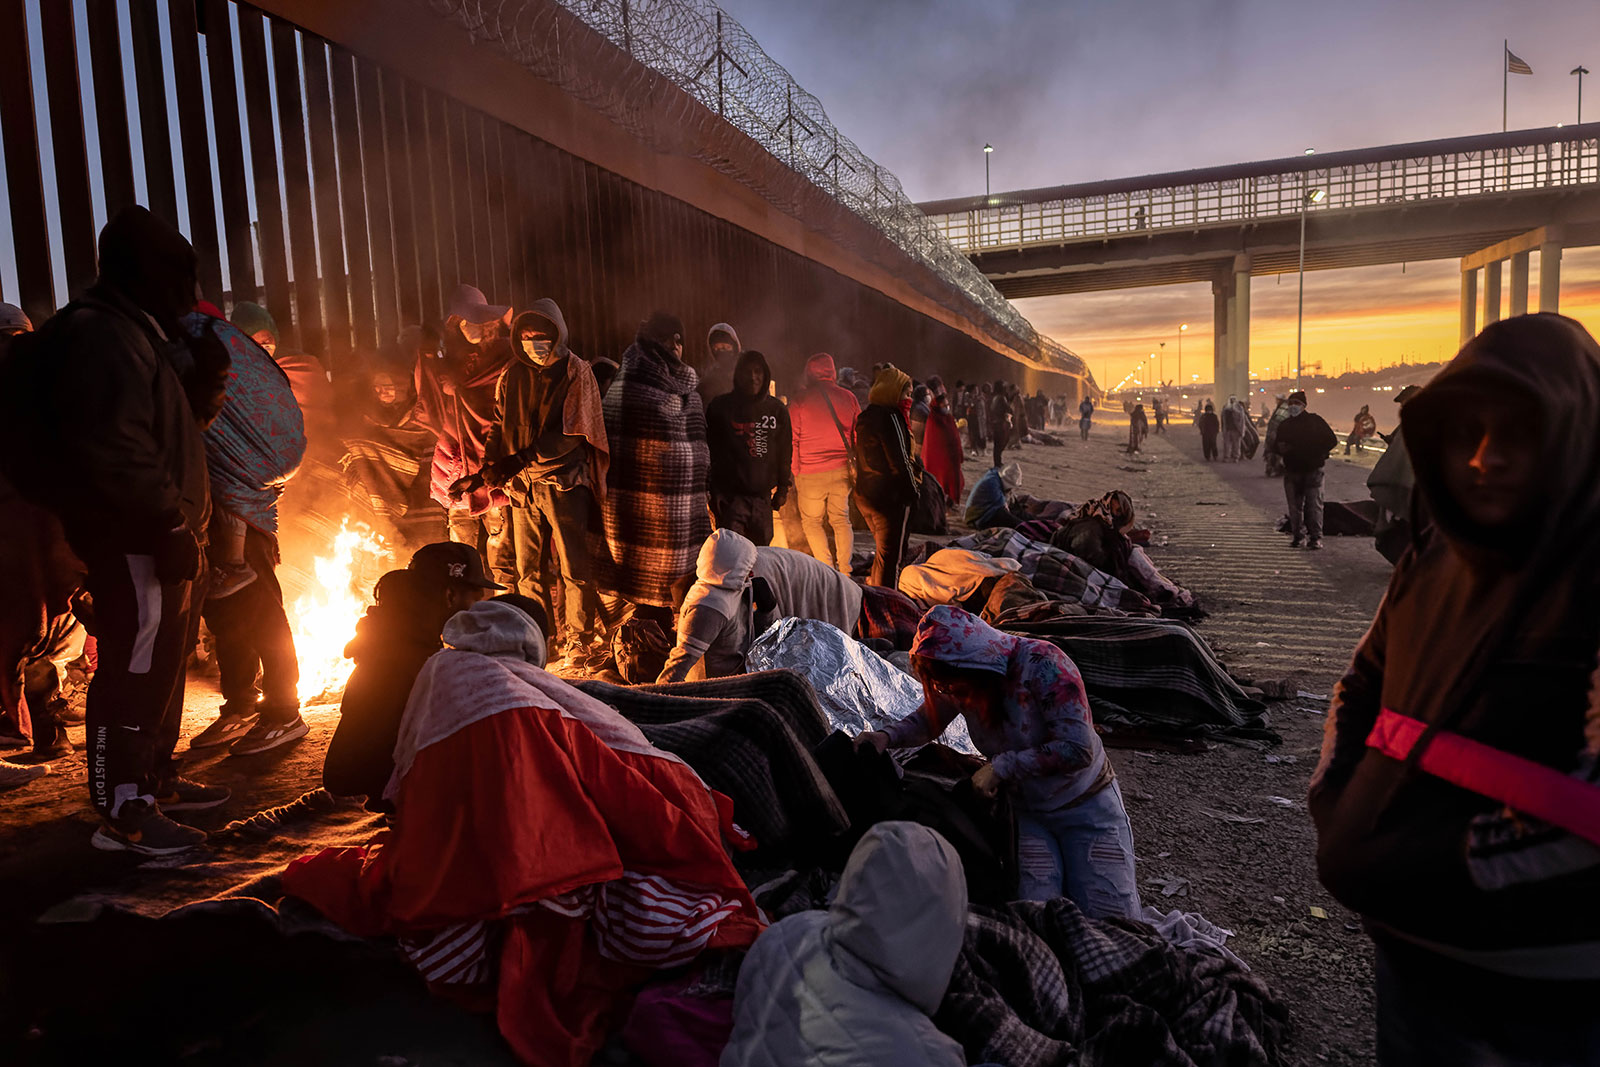 Migrants warm up next to a fire next to the U.S.-Mexico border fence in El Paso, Texas, on December 22.